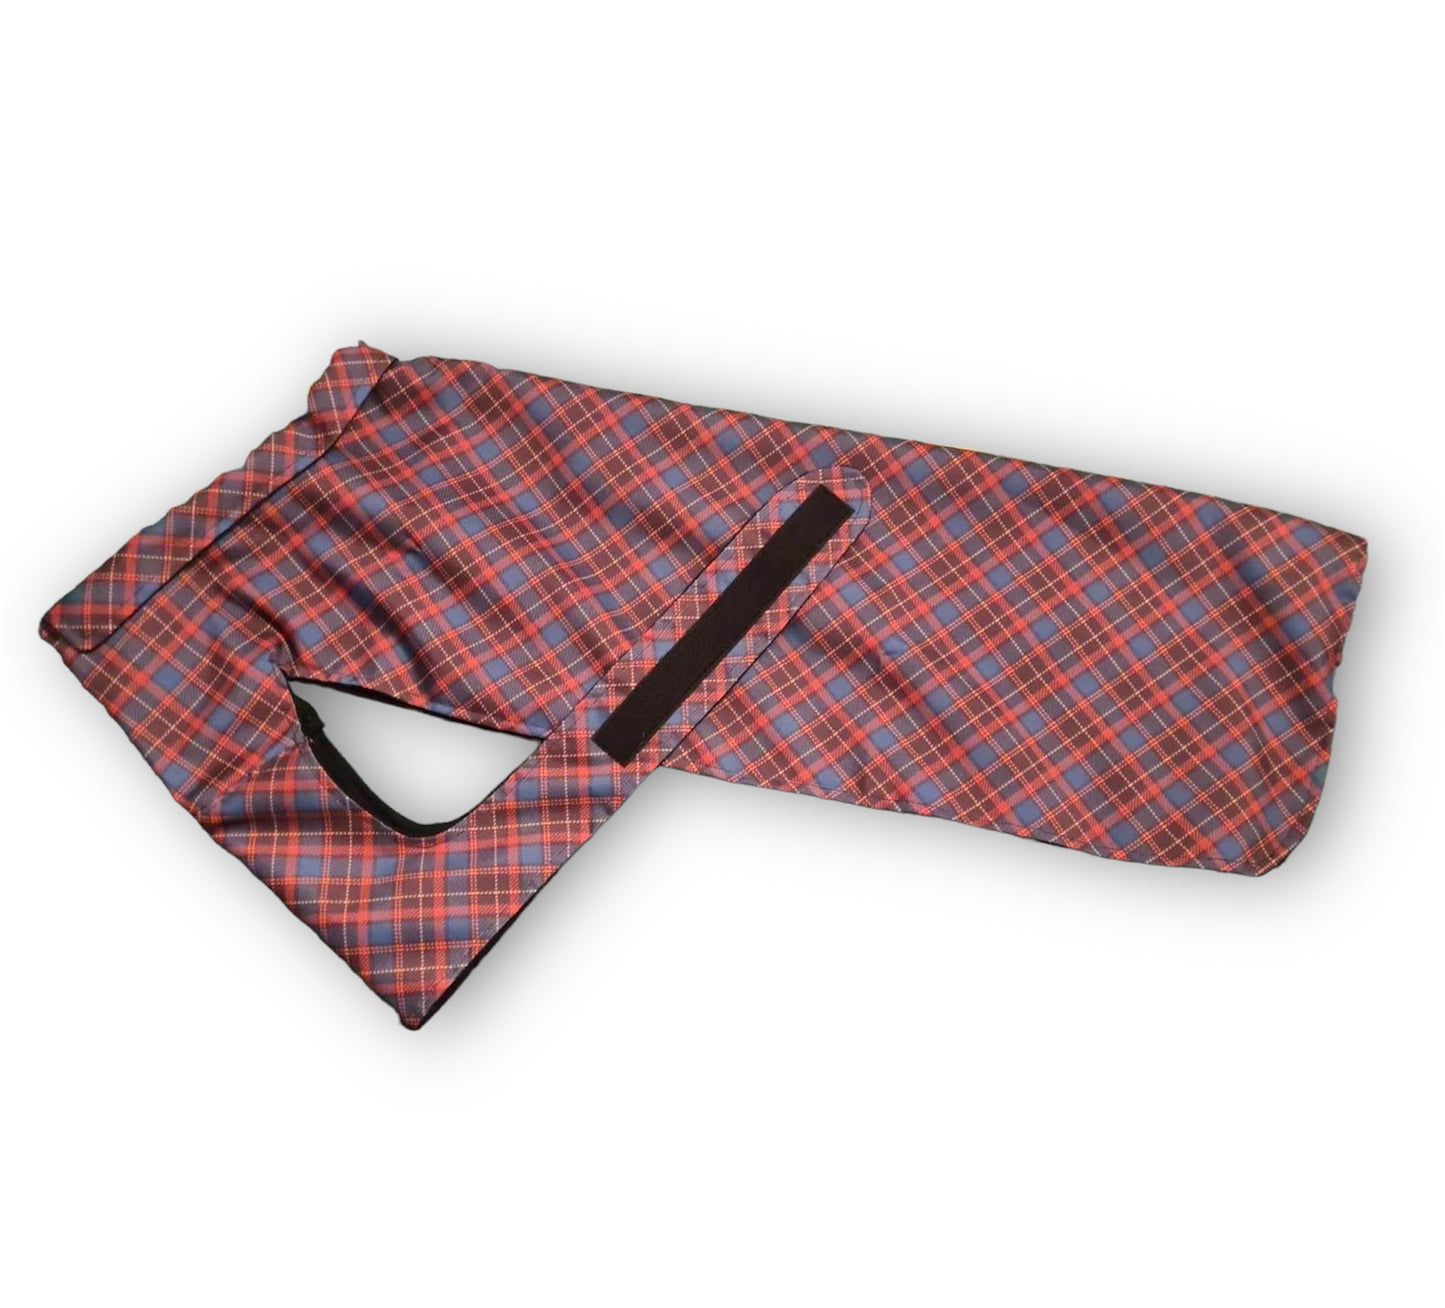 Tartan Waterproof jacket with chest protection